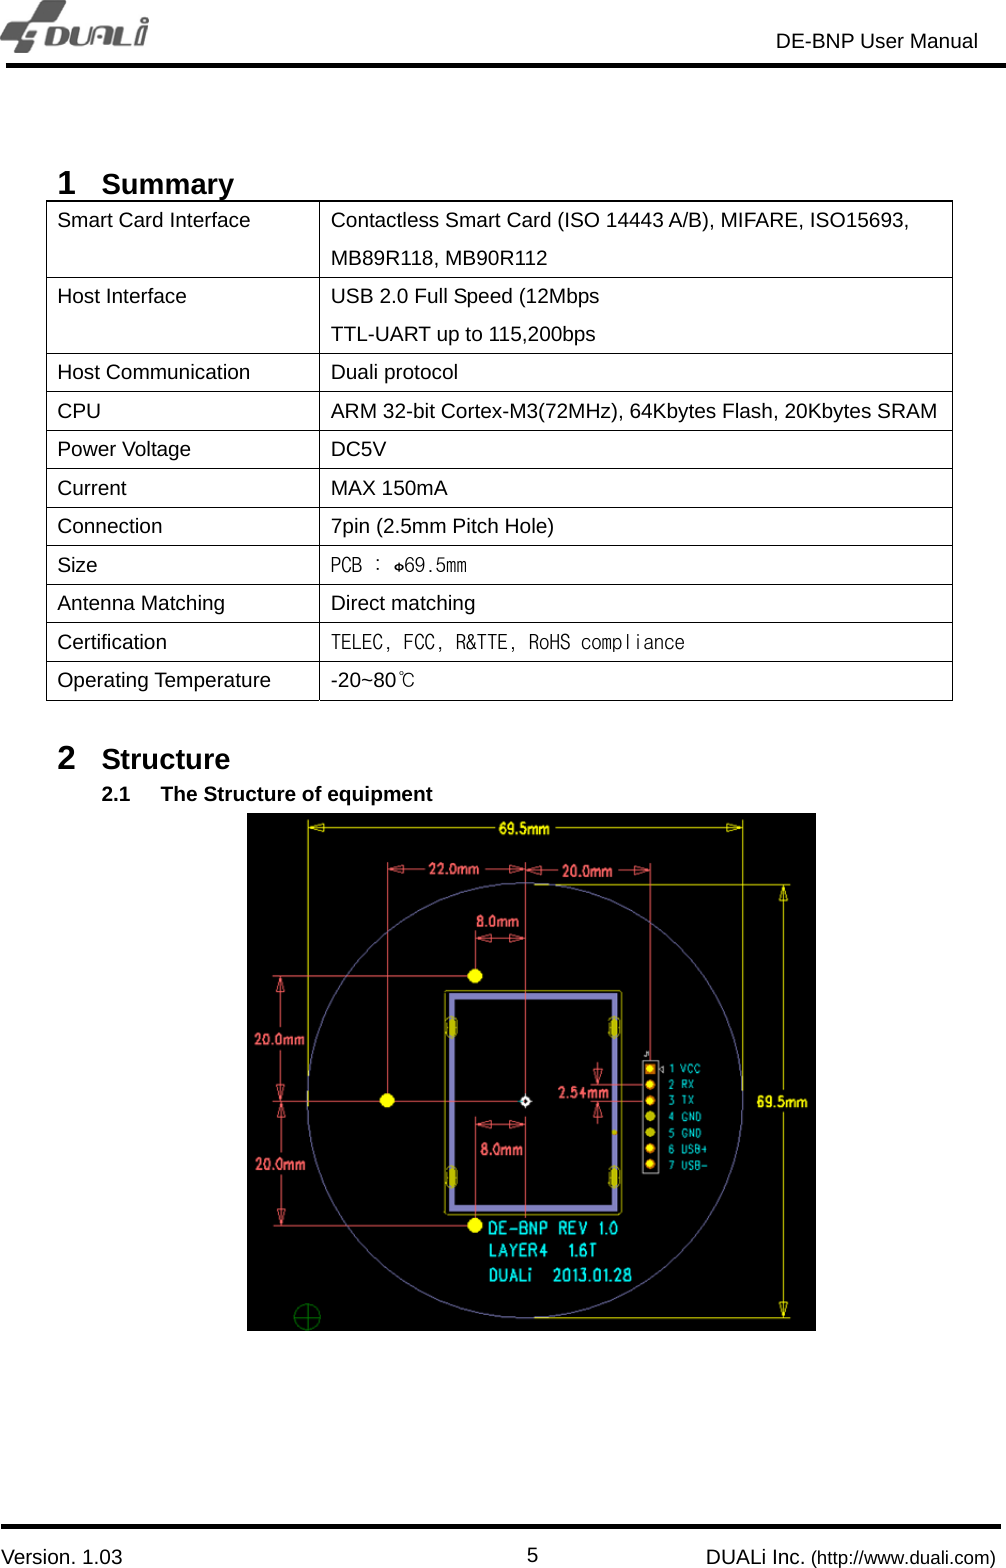                                                                       DE-BNP User Manual                            Version. 1.03                                                        DUALi Inc. (http://www.duali.com)  5 1  Summary Smart Card Interface  Contactless Smart Card (ISO 14443 A/B), MIFARE, ISO15693, MB89R118, MB90R112 Host Interface  USB 2.0 Full Speed (12Mbps TTL-UART up to 115,200bps Host Communication  Duali protocol CPU  ARM 32-bit Cortex-M3(72MHz), 64Kbytes Flash, 20Kbytes SRAMPower Voltage  DC5V Current MAX 150mA Connection    7pin (2.5mm Pitch Hole) Size  PCB : ɸ69.5mm Antenna Matching  Direct matching Certification  TELEC, FCC, R&amp;TTE, RoHS compliance Operating Temperature  -20~80℃  2  Structure 2.1  The Structure of equipment     